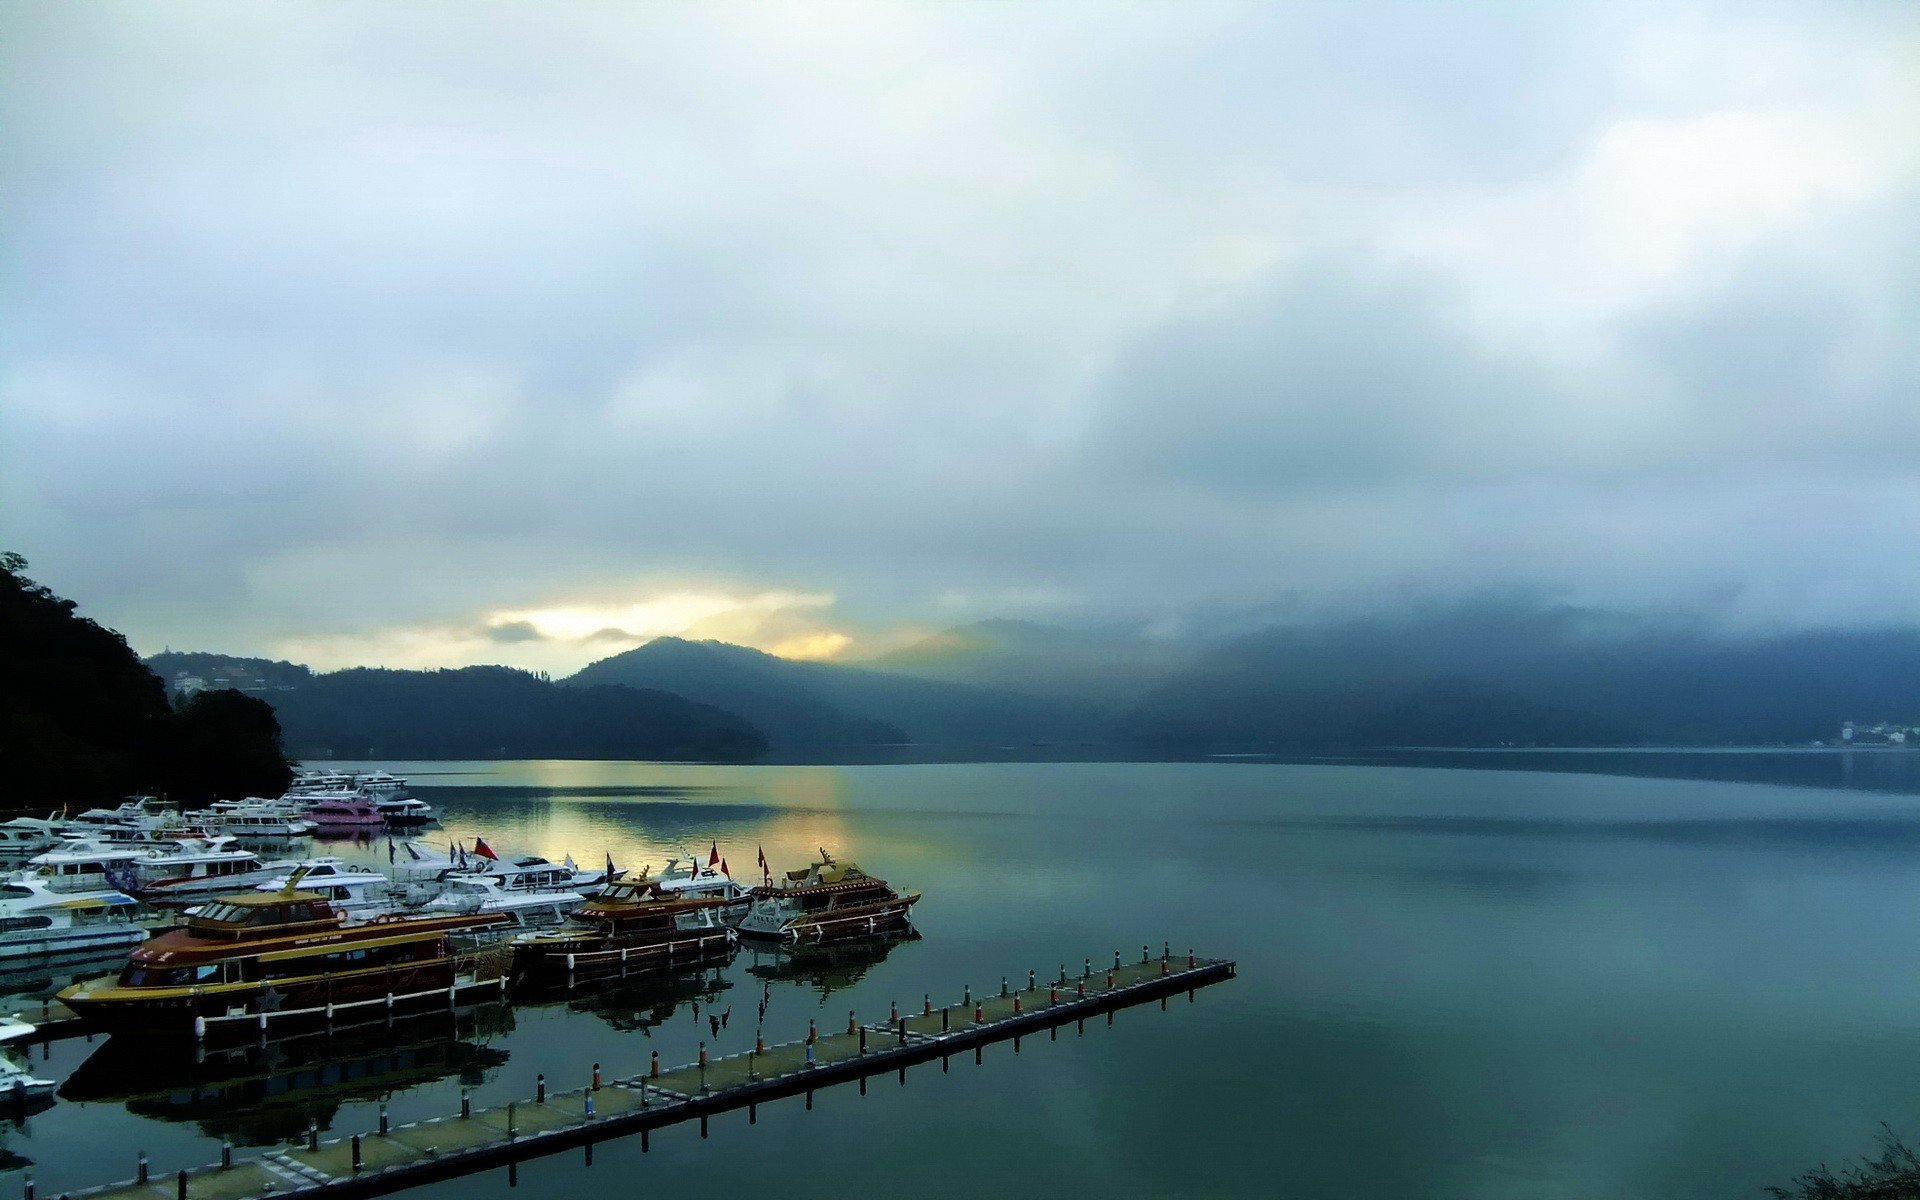 water, Sunrise, Mountains, Clouds, Landscapes, Dock, Ships, Piers, Boats, Lakes, Port, Skies Wallpaper